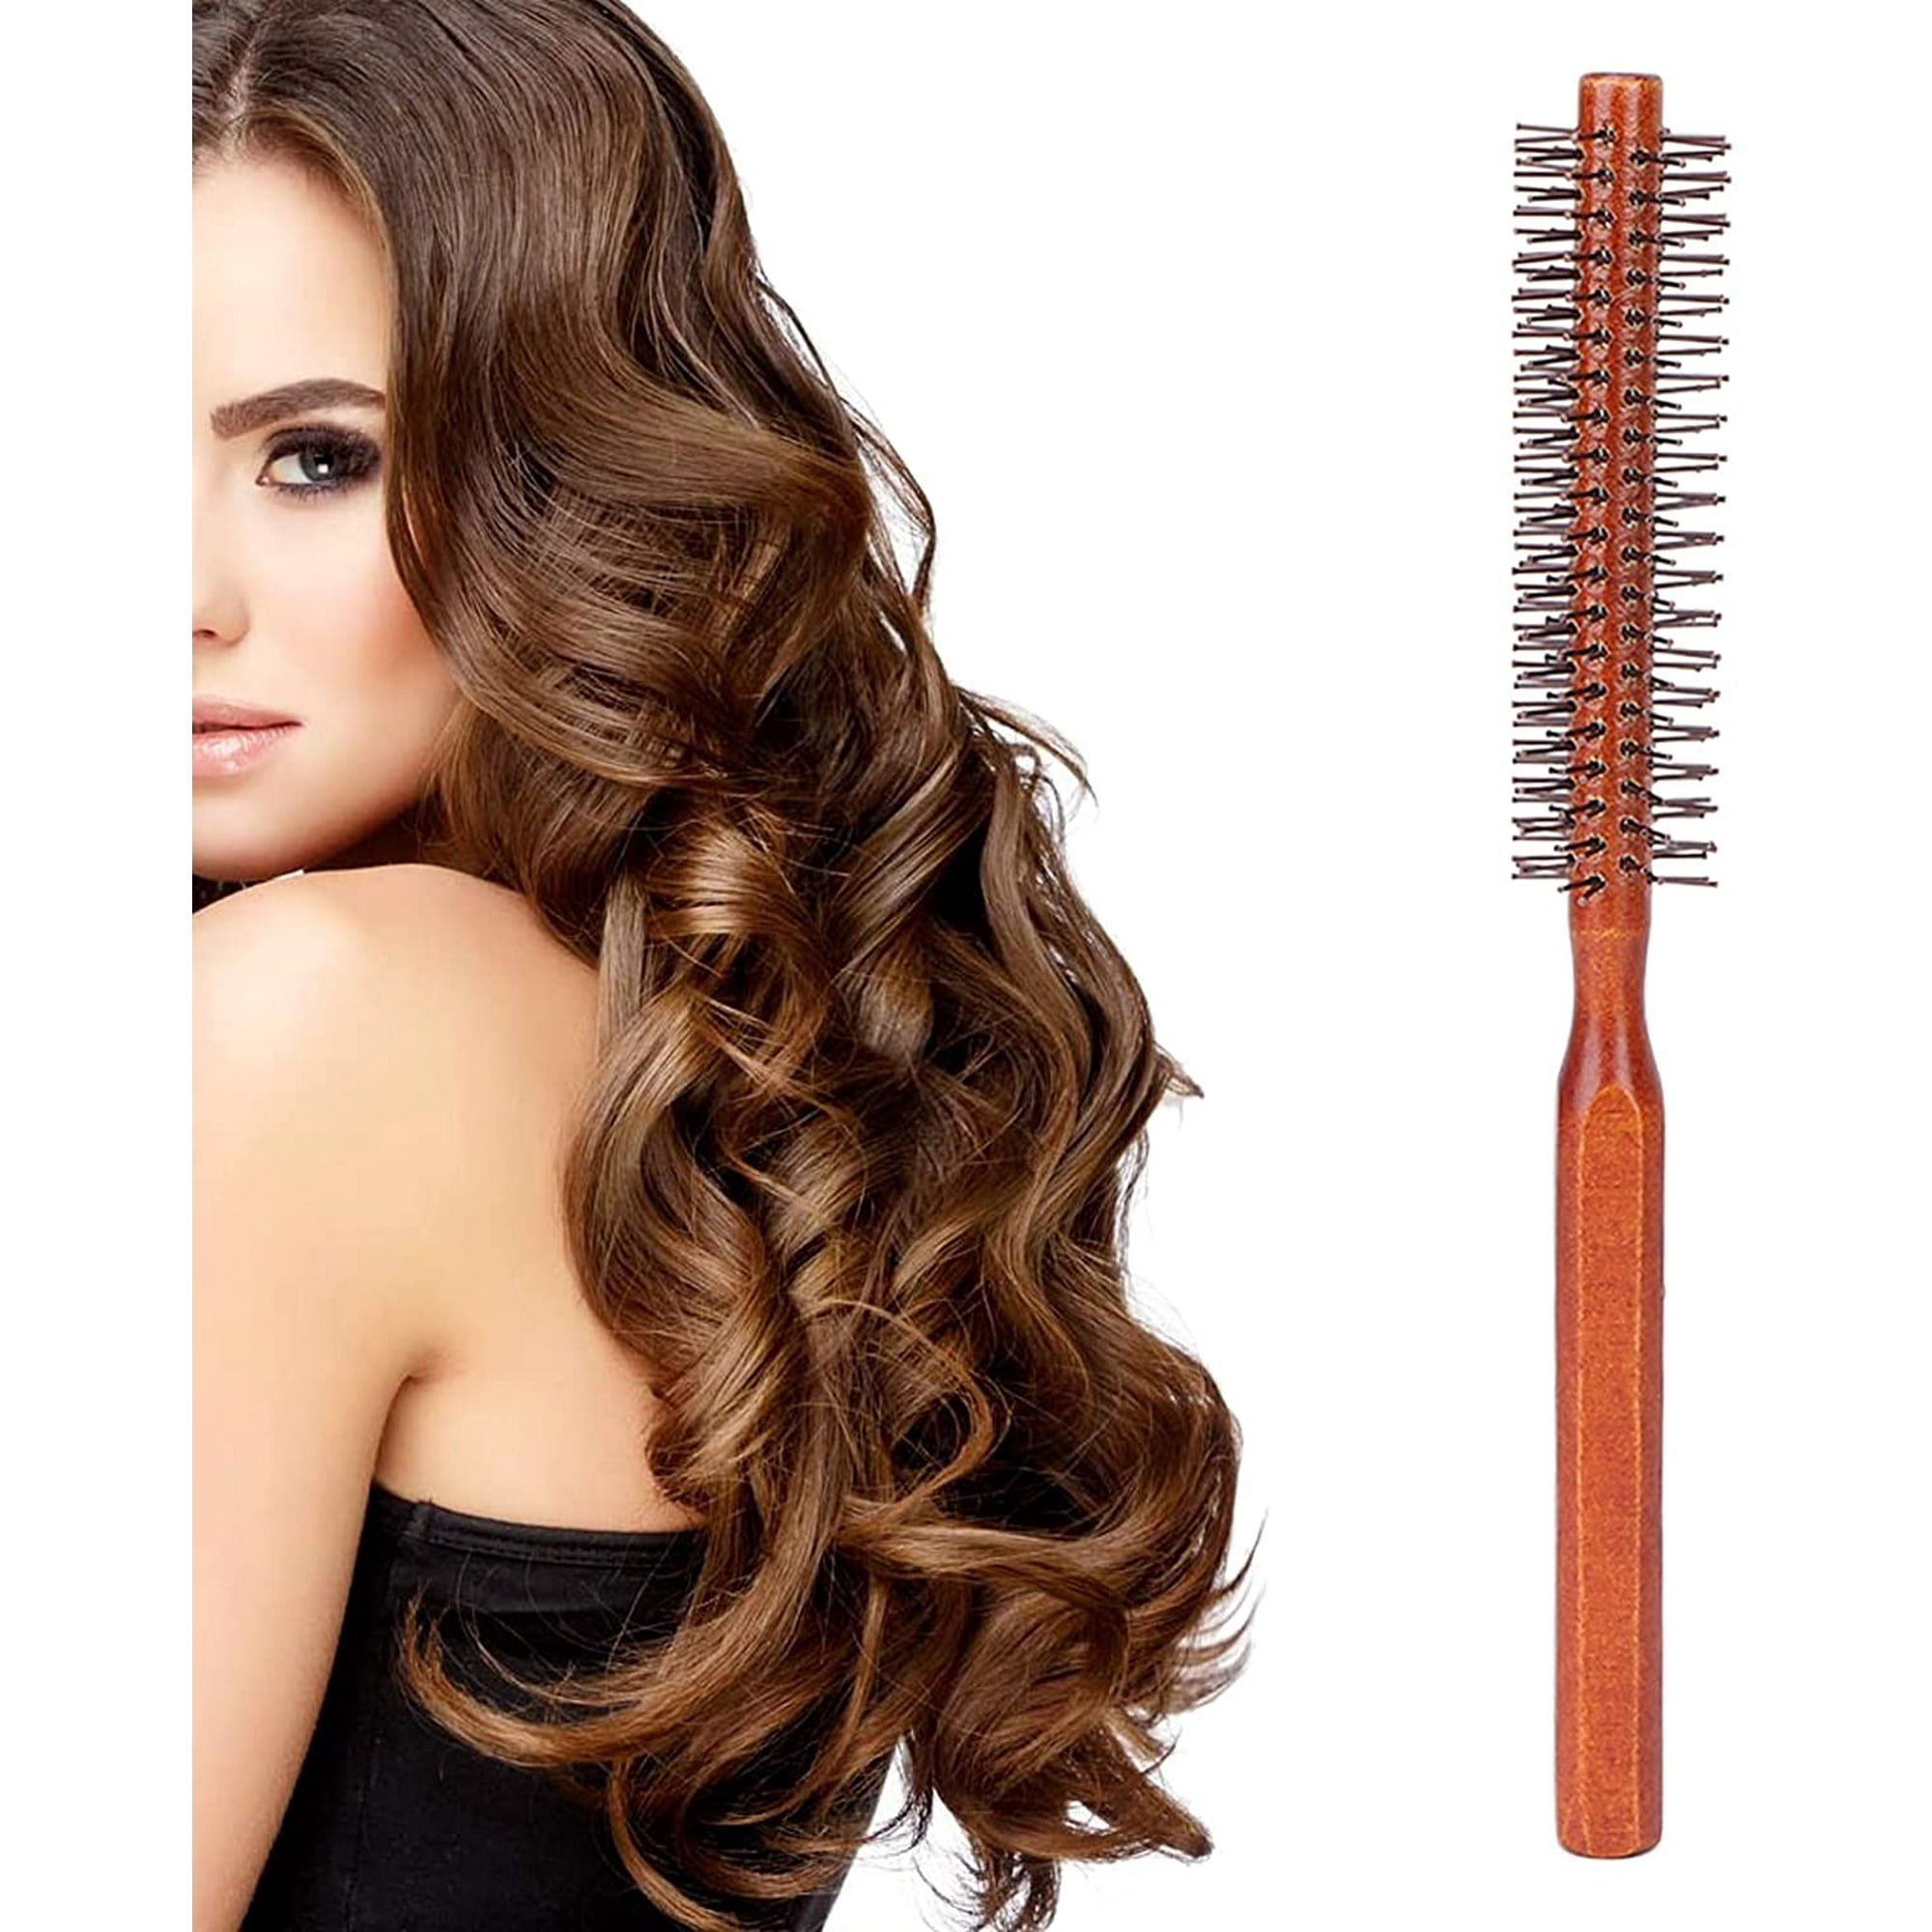 Round Hair Brush for Blow Drying with Soft Nylon Bristles, Hot Curling  Round Roll Hairbrush with Natural Wooden Handle, Prevent Dryness and Split  Ends, Keep Hair Shiny | Walmart Canada